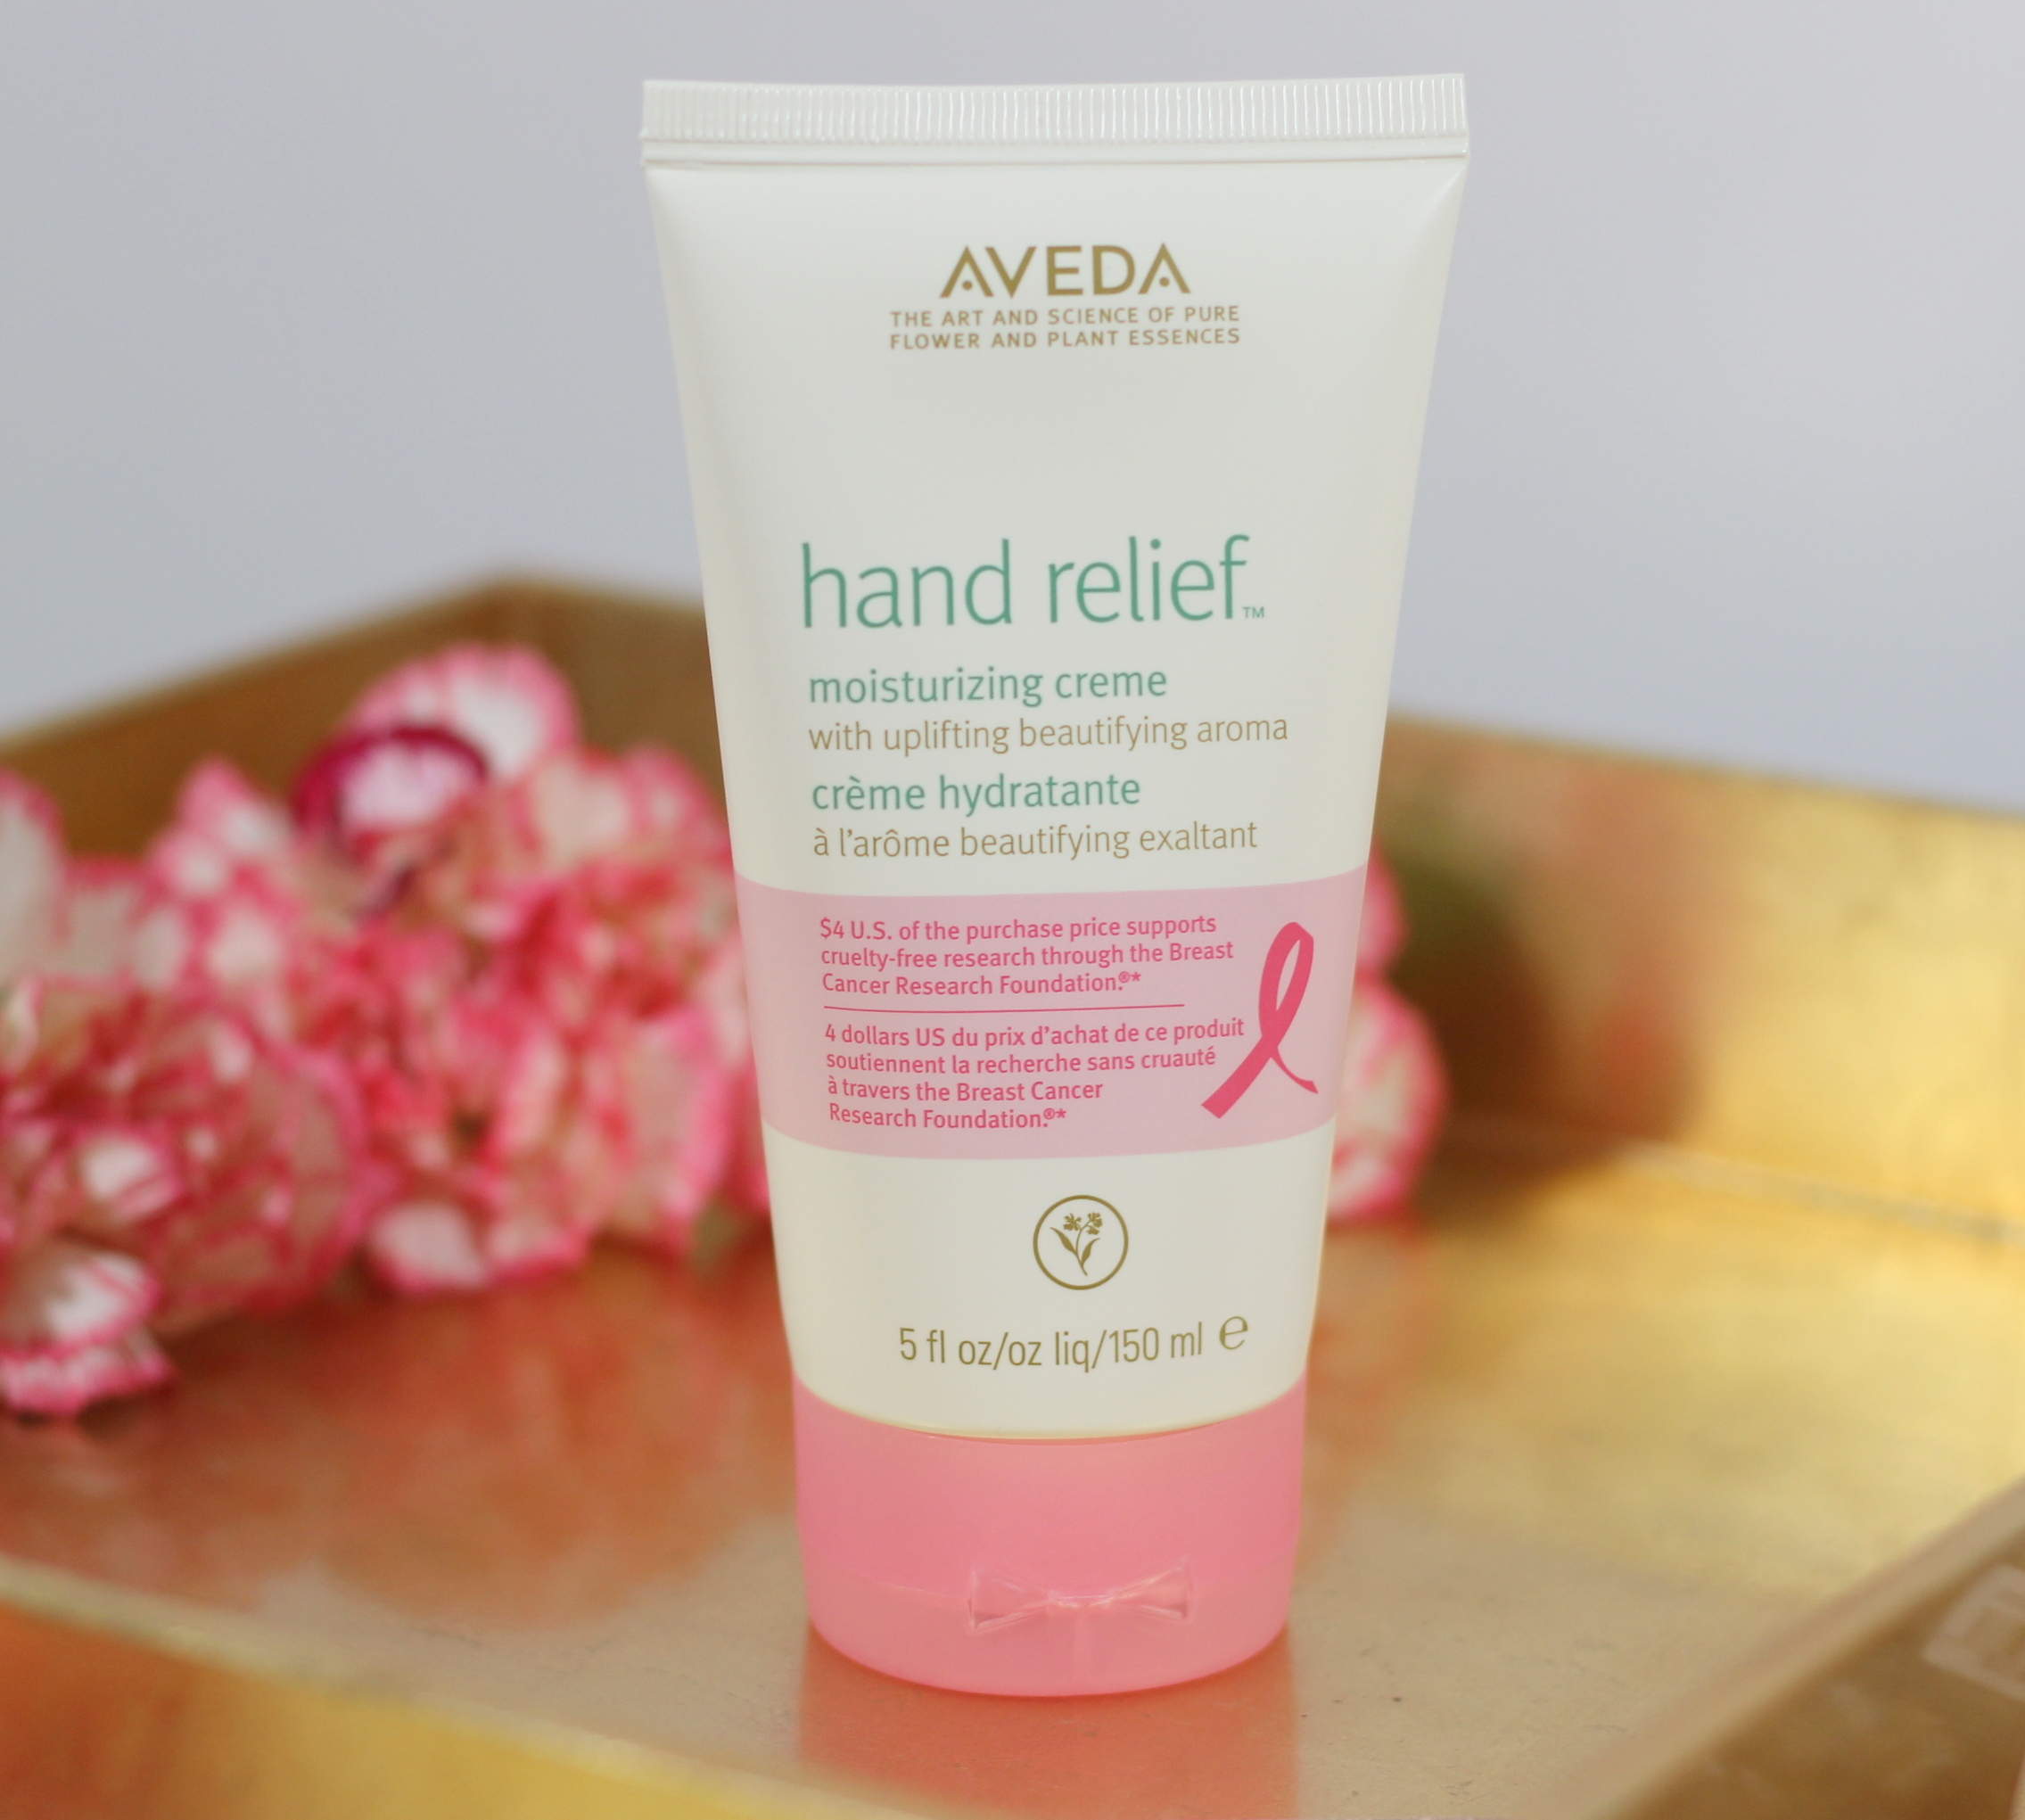 AVEDA Limited Edition BCA Hand Relief Moisturizing Creme